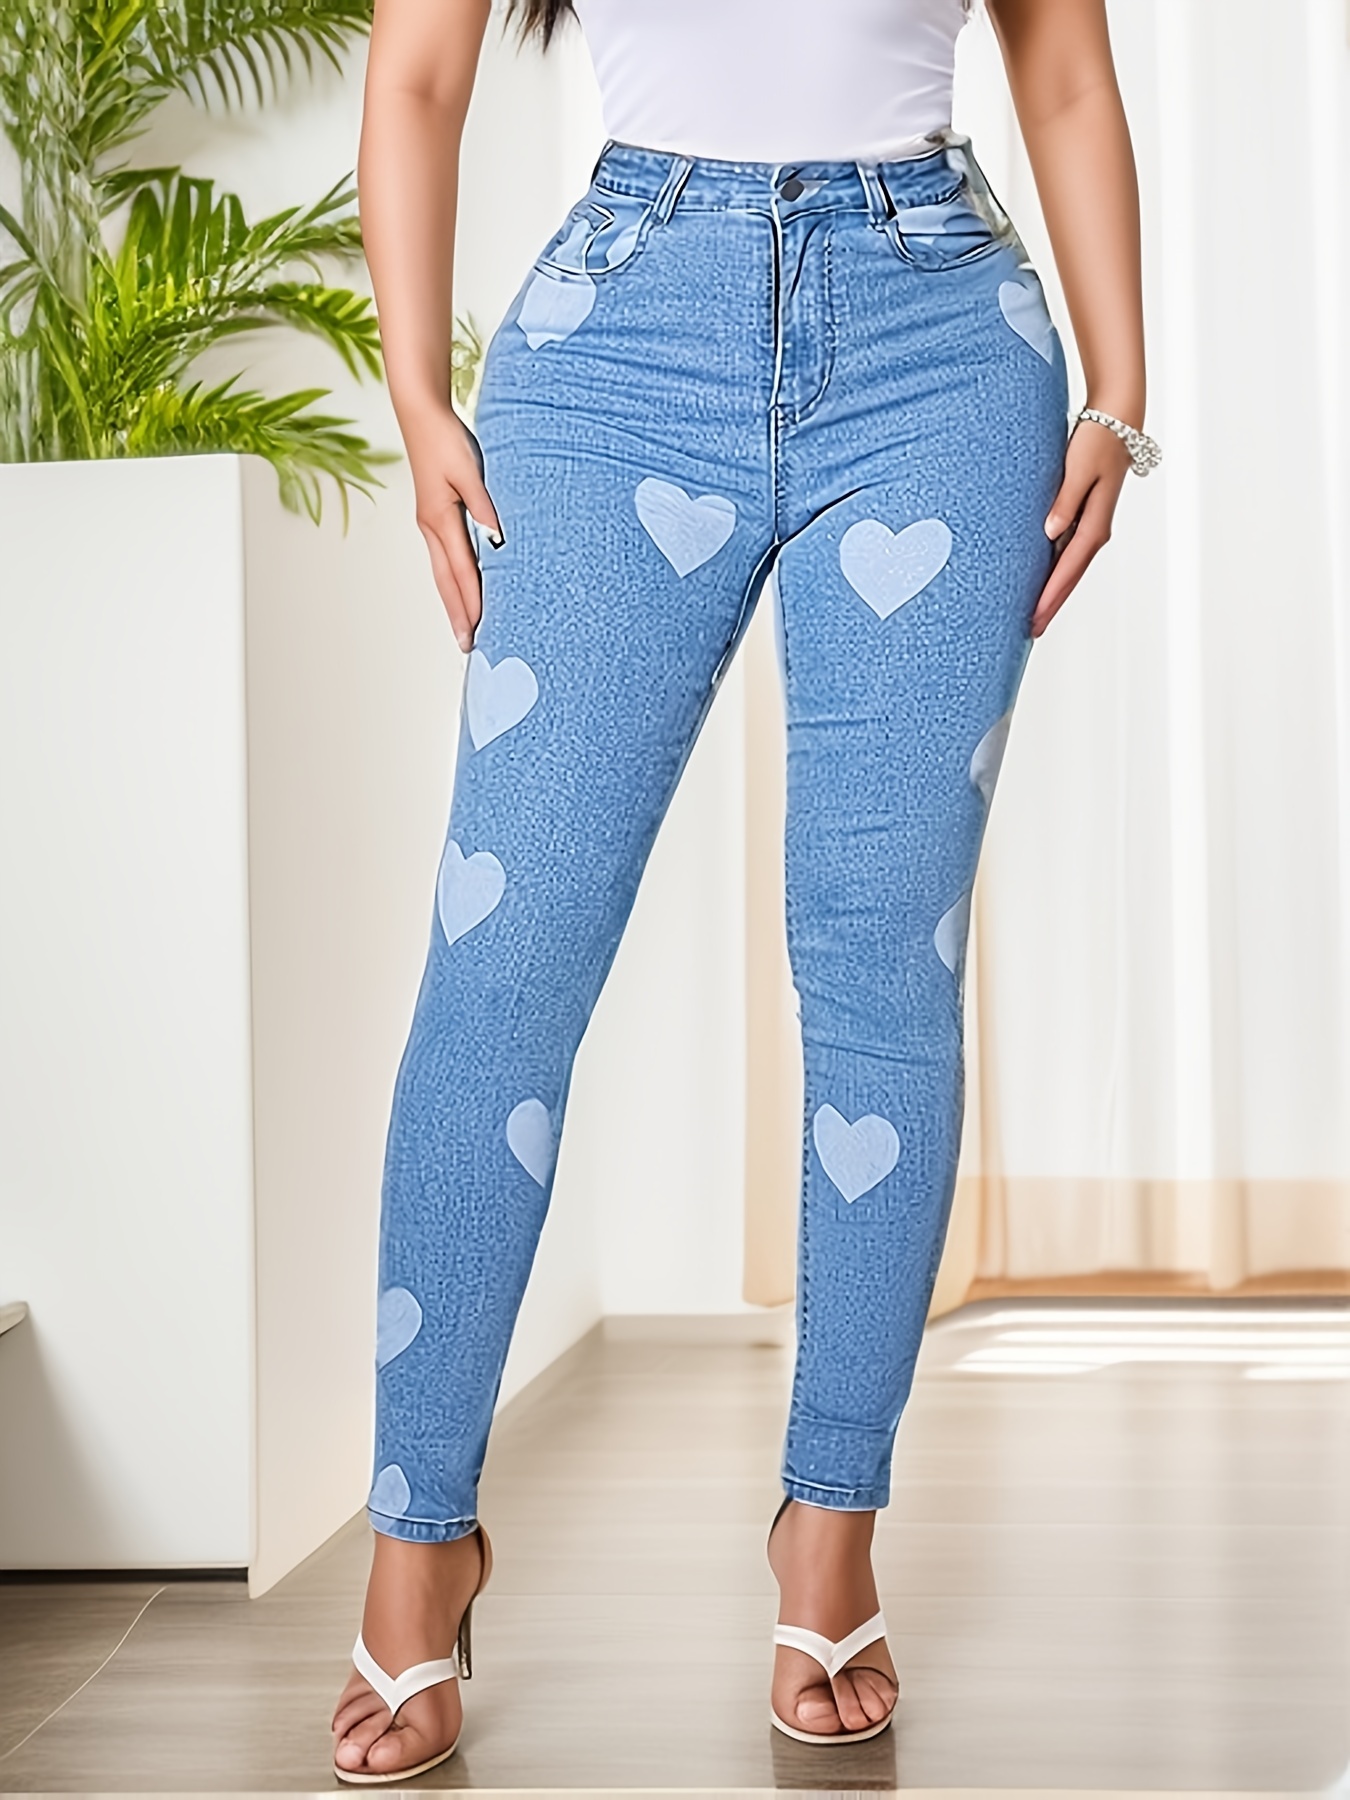 Double Button Ripped Skinny Jeans, High * Washed Blue Stretchy Denim Pants,  Women's Denim Jeans & Clothing